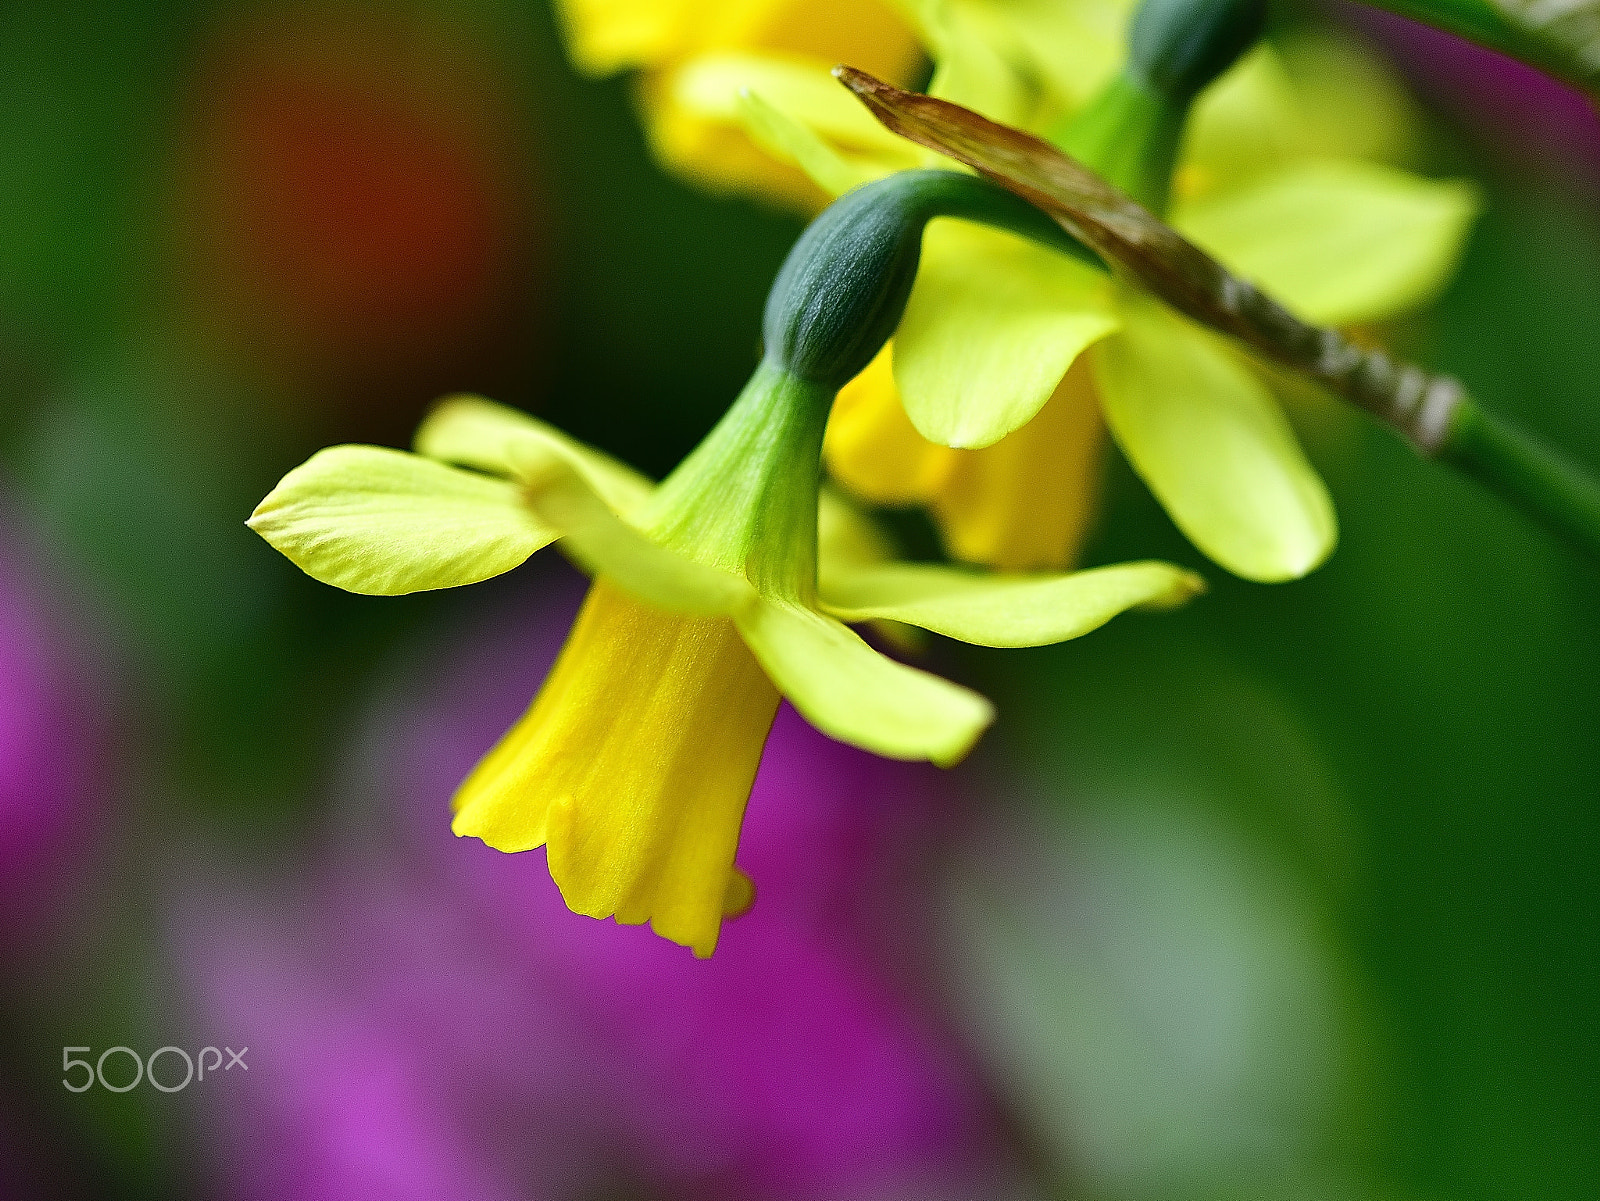 Nikon D800E + Nikon AF-S Micro-Nikkor 105mm F2.8G IF-ED VR sample photo. Flowers telling spring are in green photography